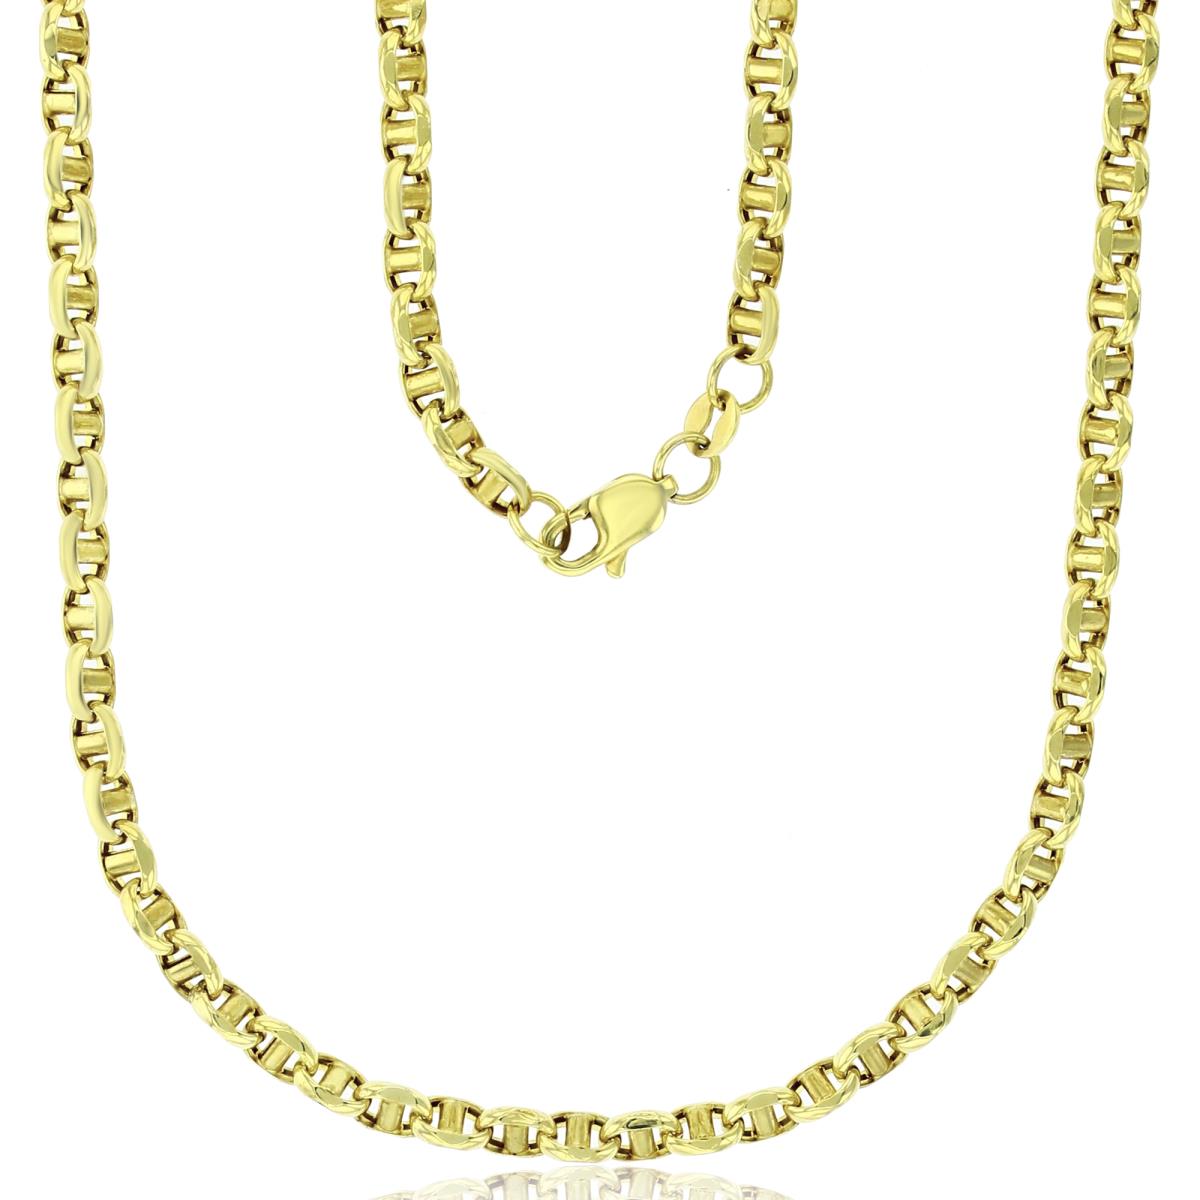 14K Yellow Gold Polished 4.15mm 7.25" Hollow Filk Chain